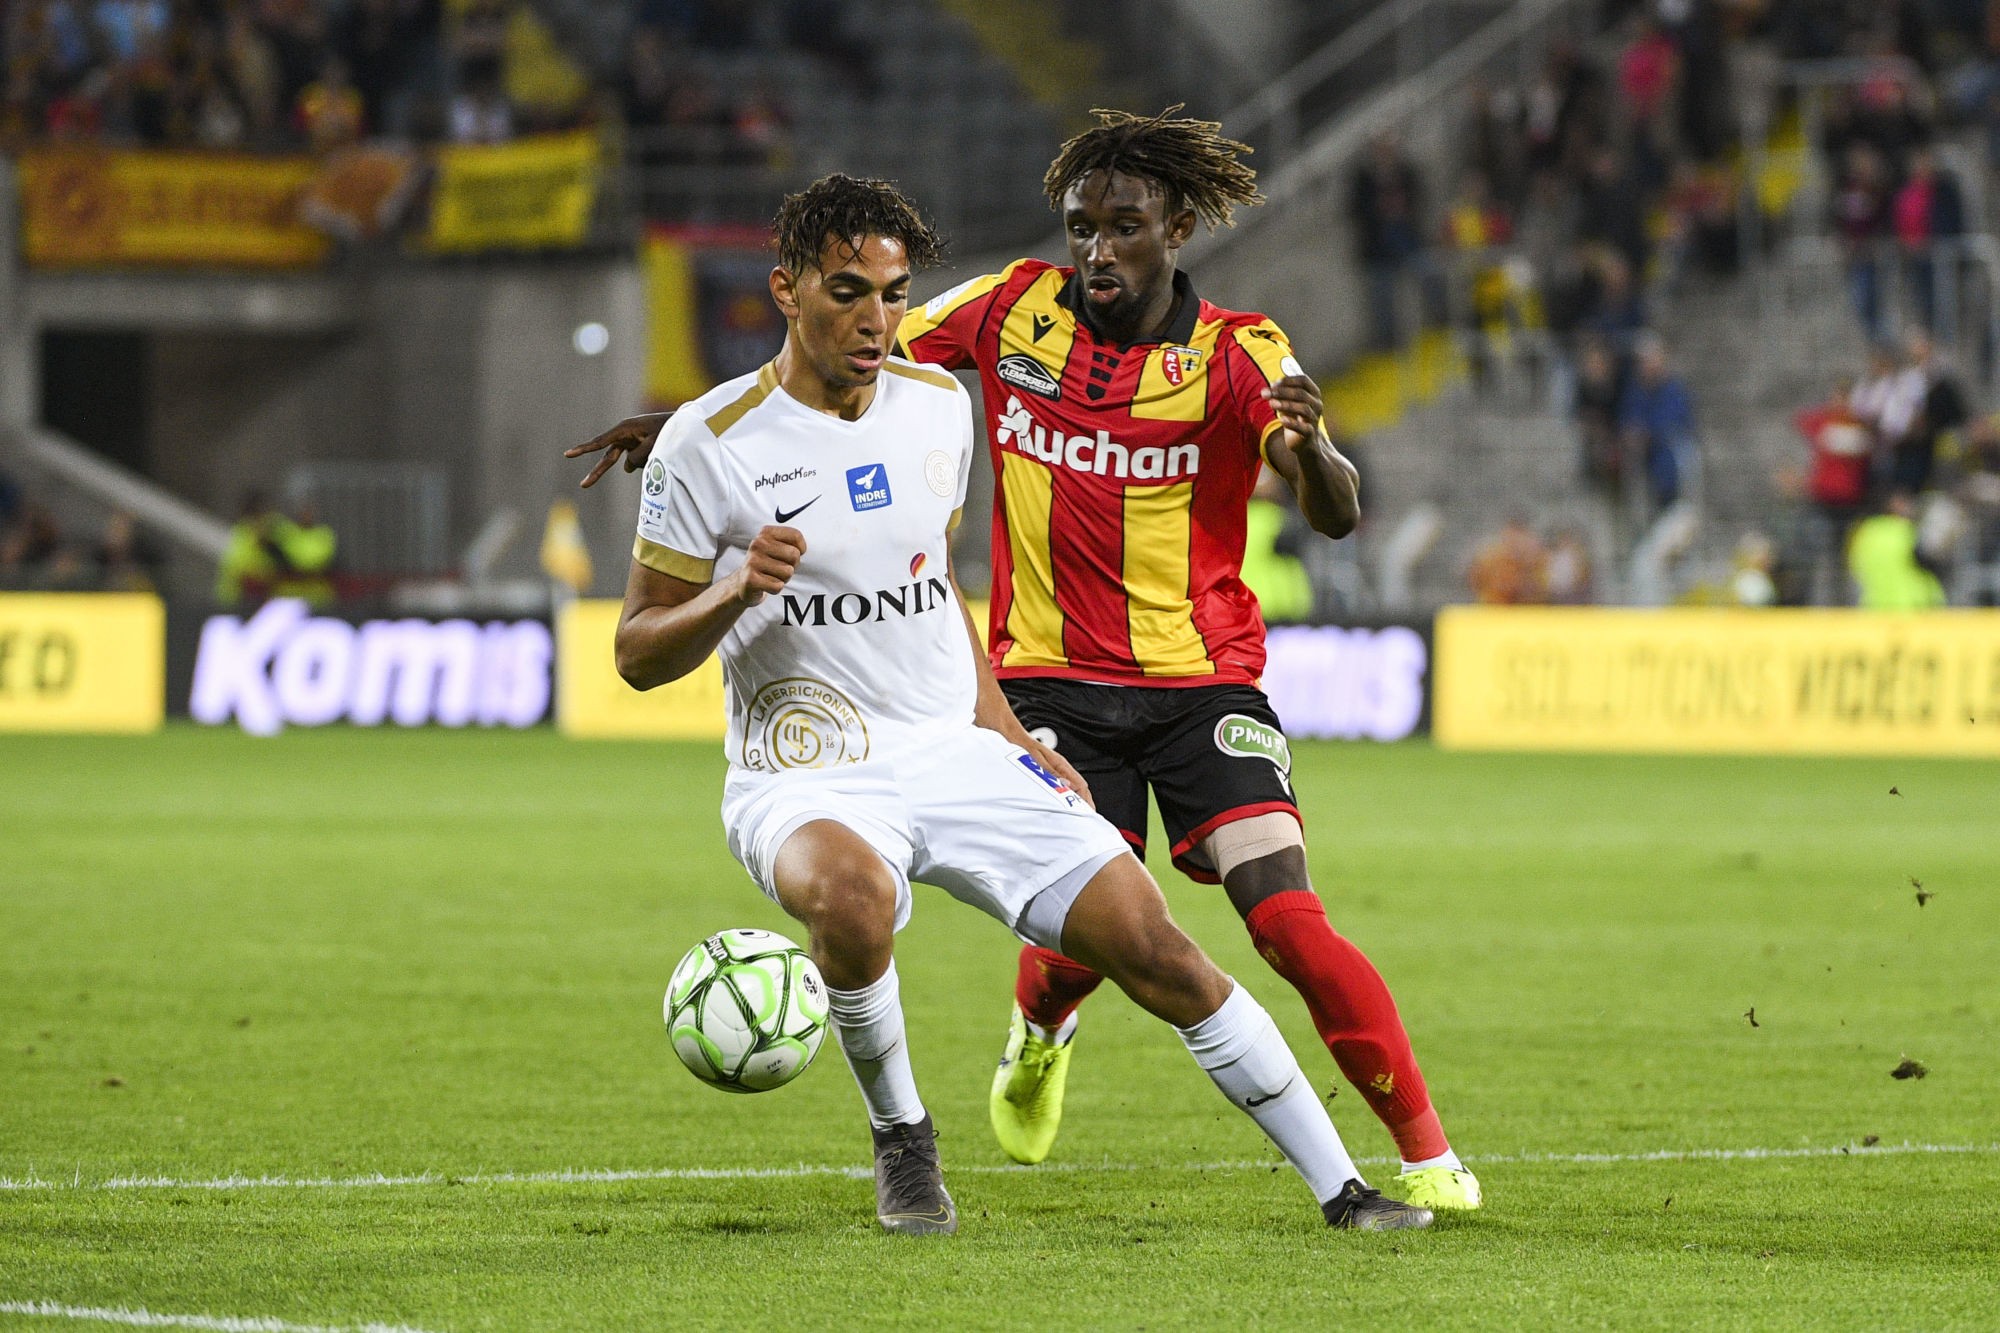 Ilyas Chouaref of Chateauroux and Charles BOLI of Lens during the Ligue 2 match between Lens and Chateauroux at Stade Bollaert-Delelis on September 16, 2019 in Lens, France. (Photo by Aude Alcover/Icon Sport) - Charles BOLI - Ilyas CHOUAREF - Stade Bollaert-Delelis - Lens (France)